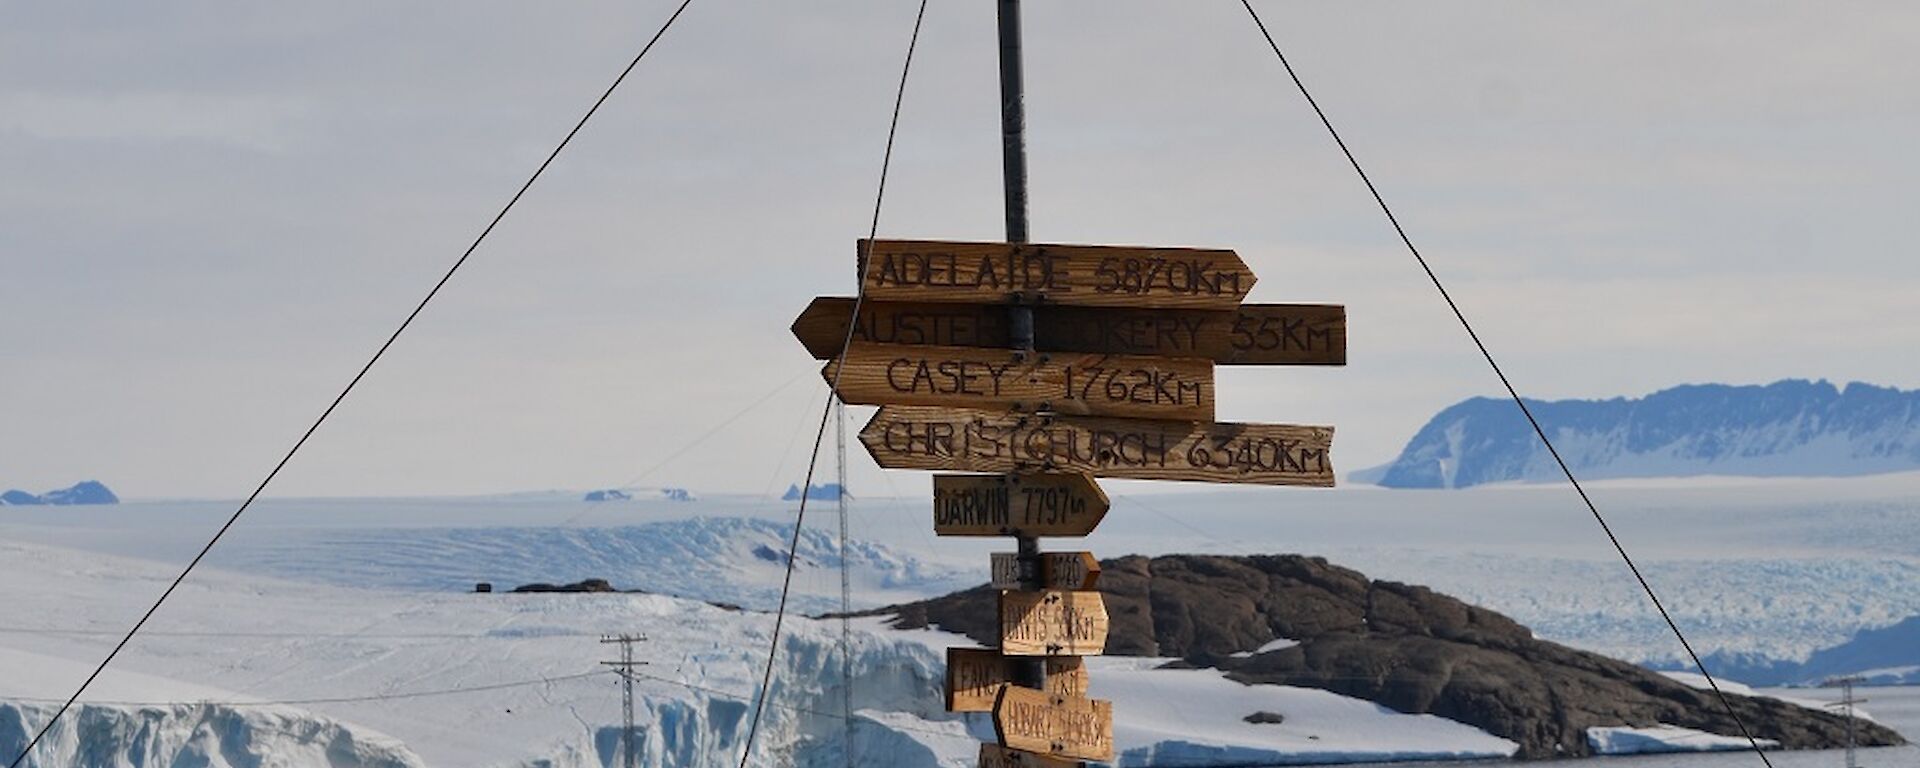 A signpost with approx 20 different signs pointing all over the world